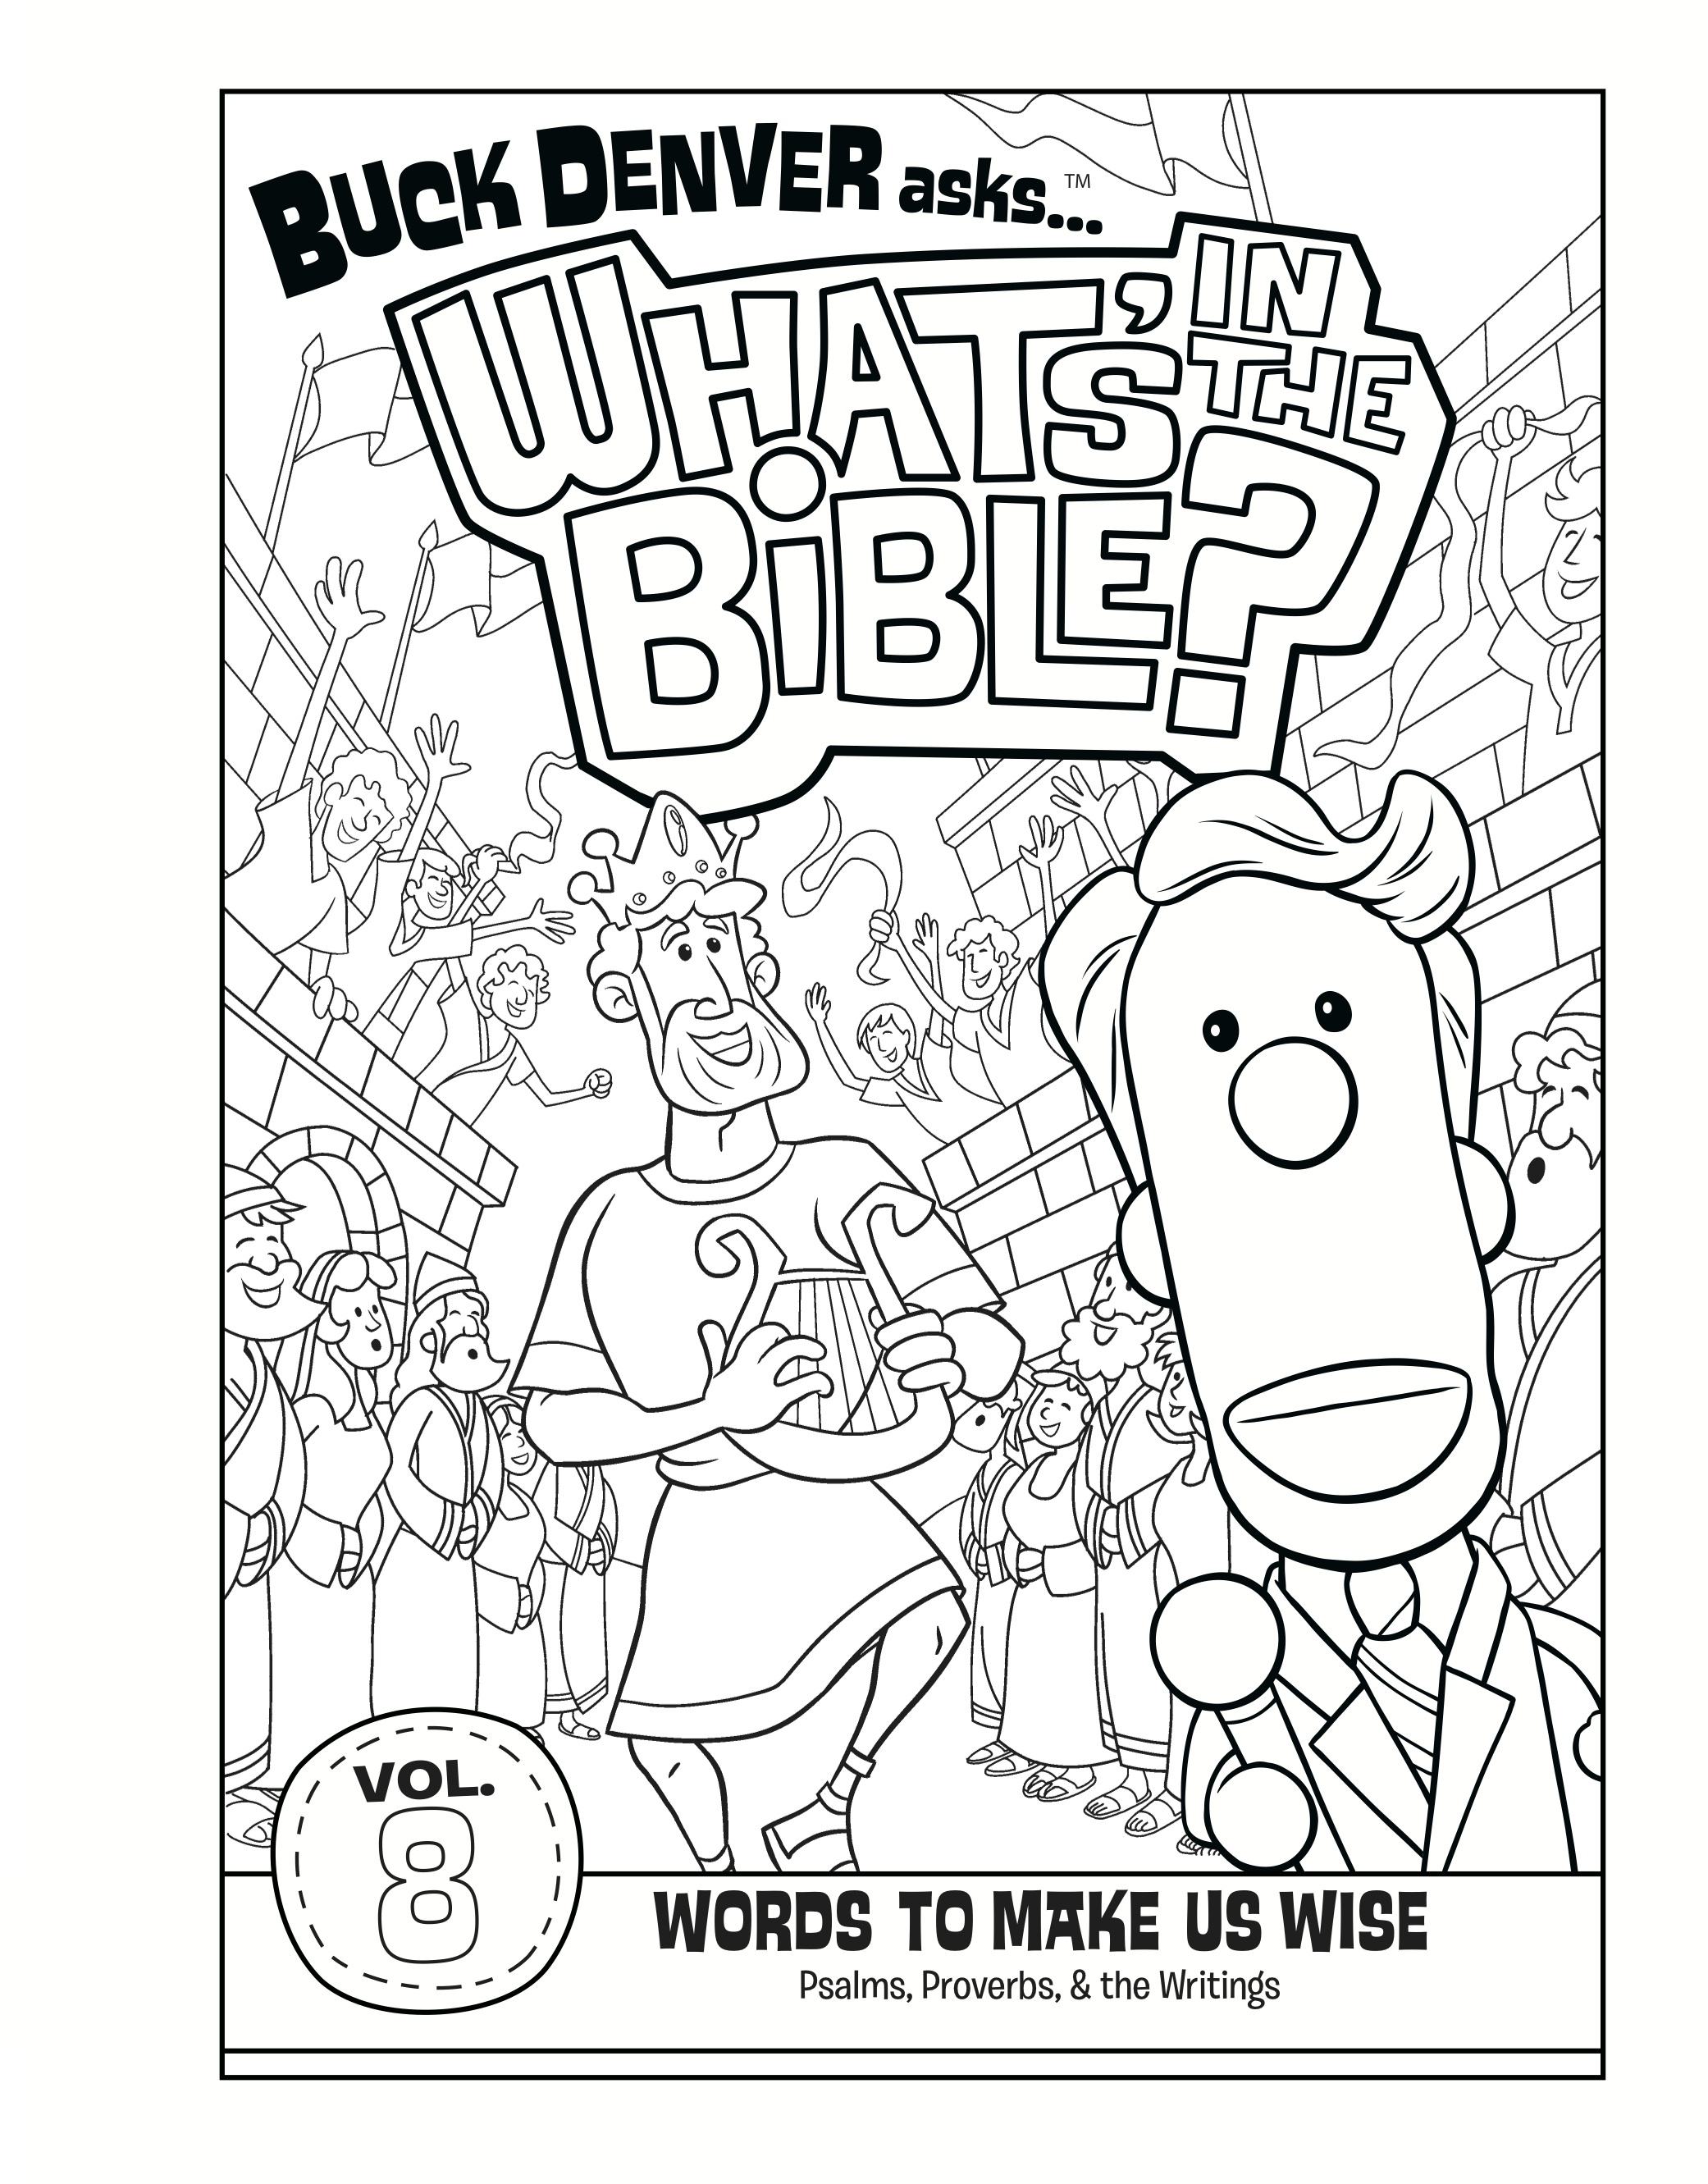 Volume 8 Coloring Page Words to Make Us Wise Whats in